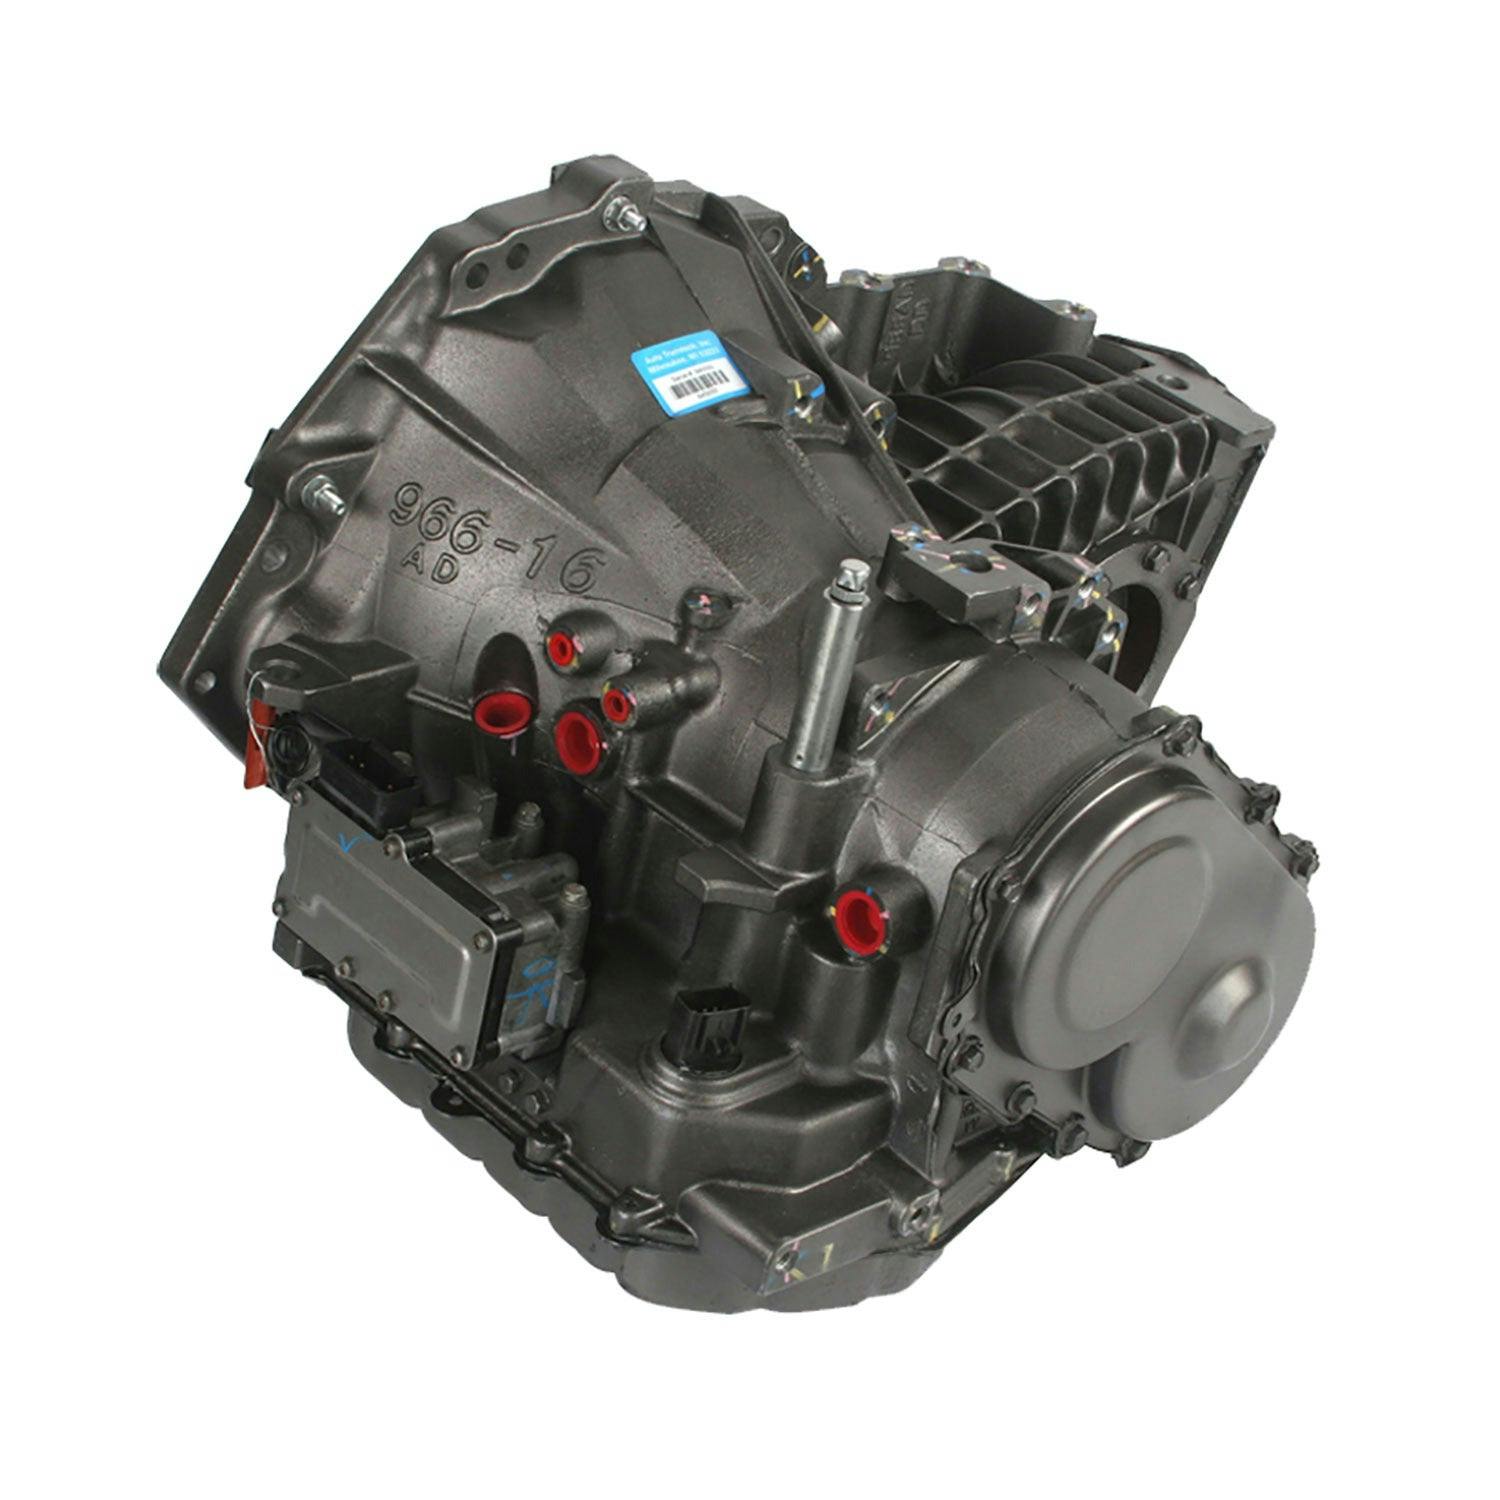 Automatic Transmission for 1999-2000 Chrysler Cirrus/Sebring and Dodge Avenger/Stratus FWD with 2.5L V6 Engine